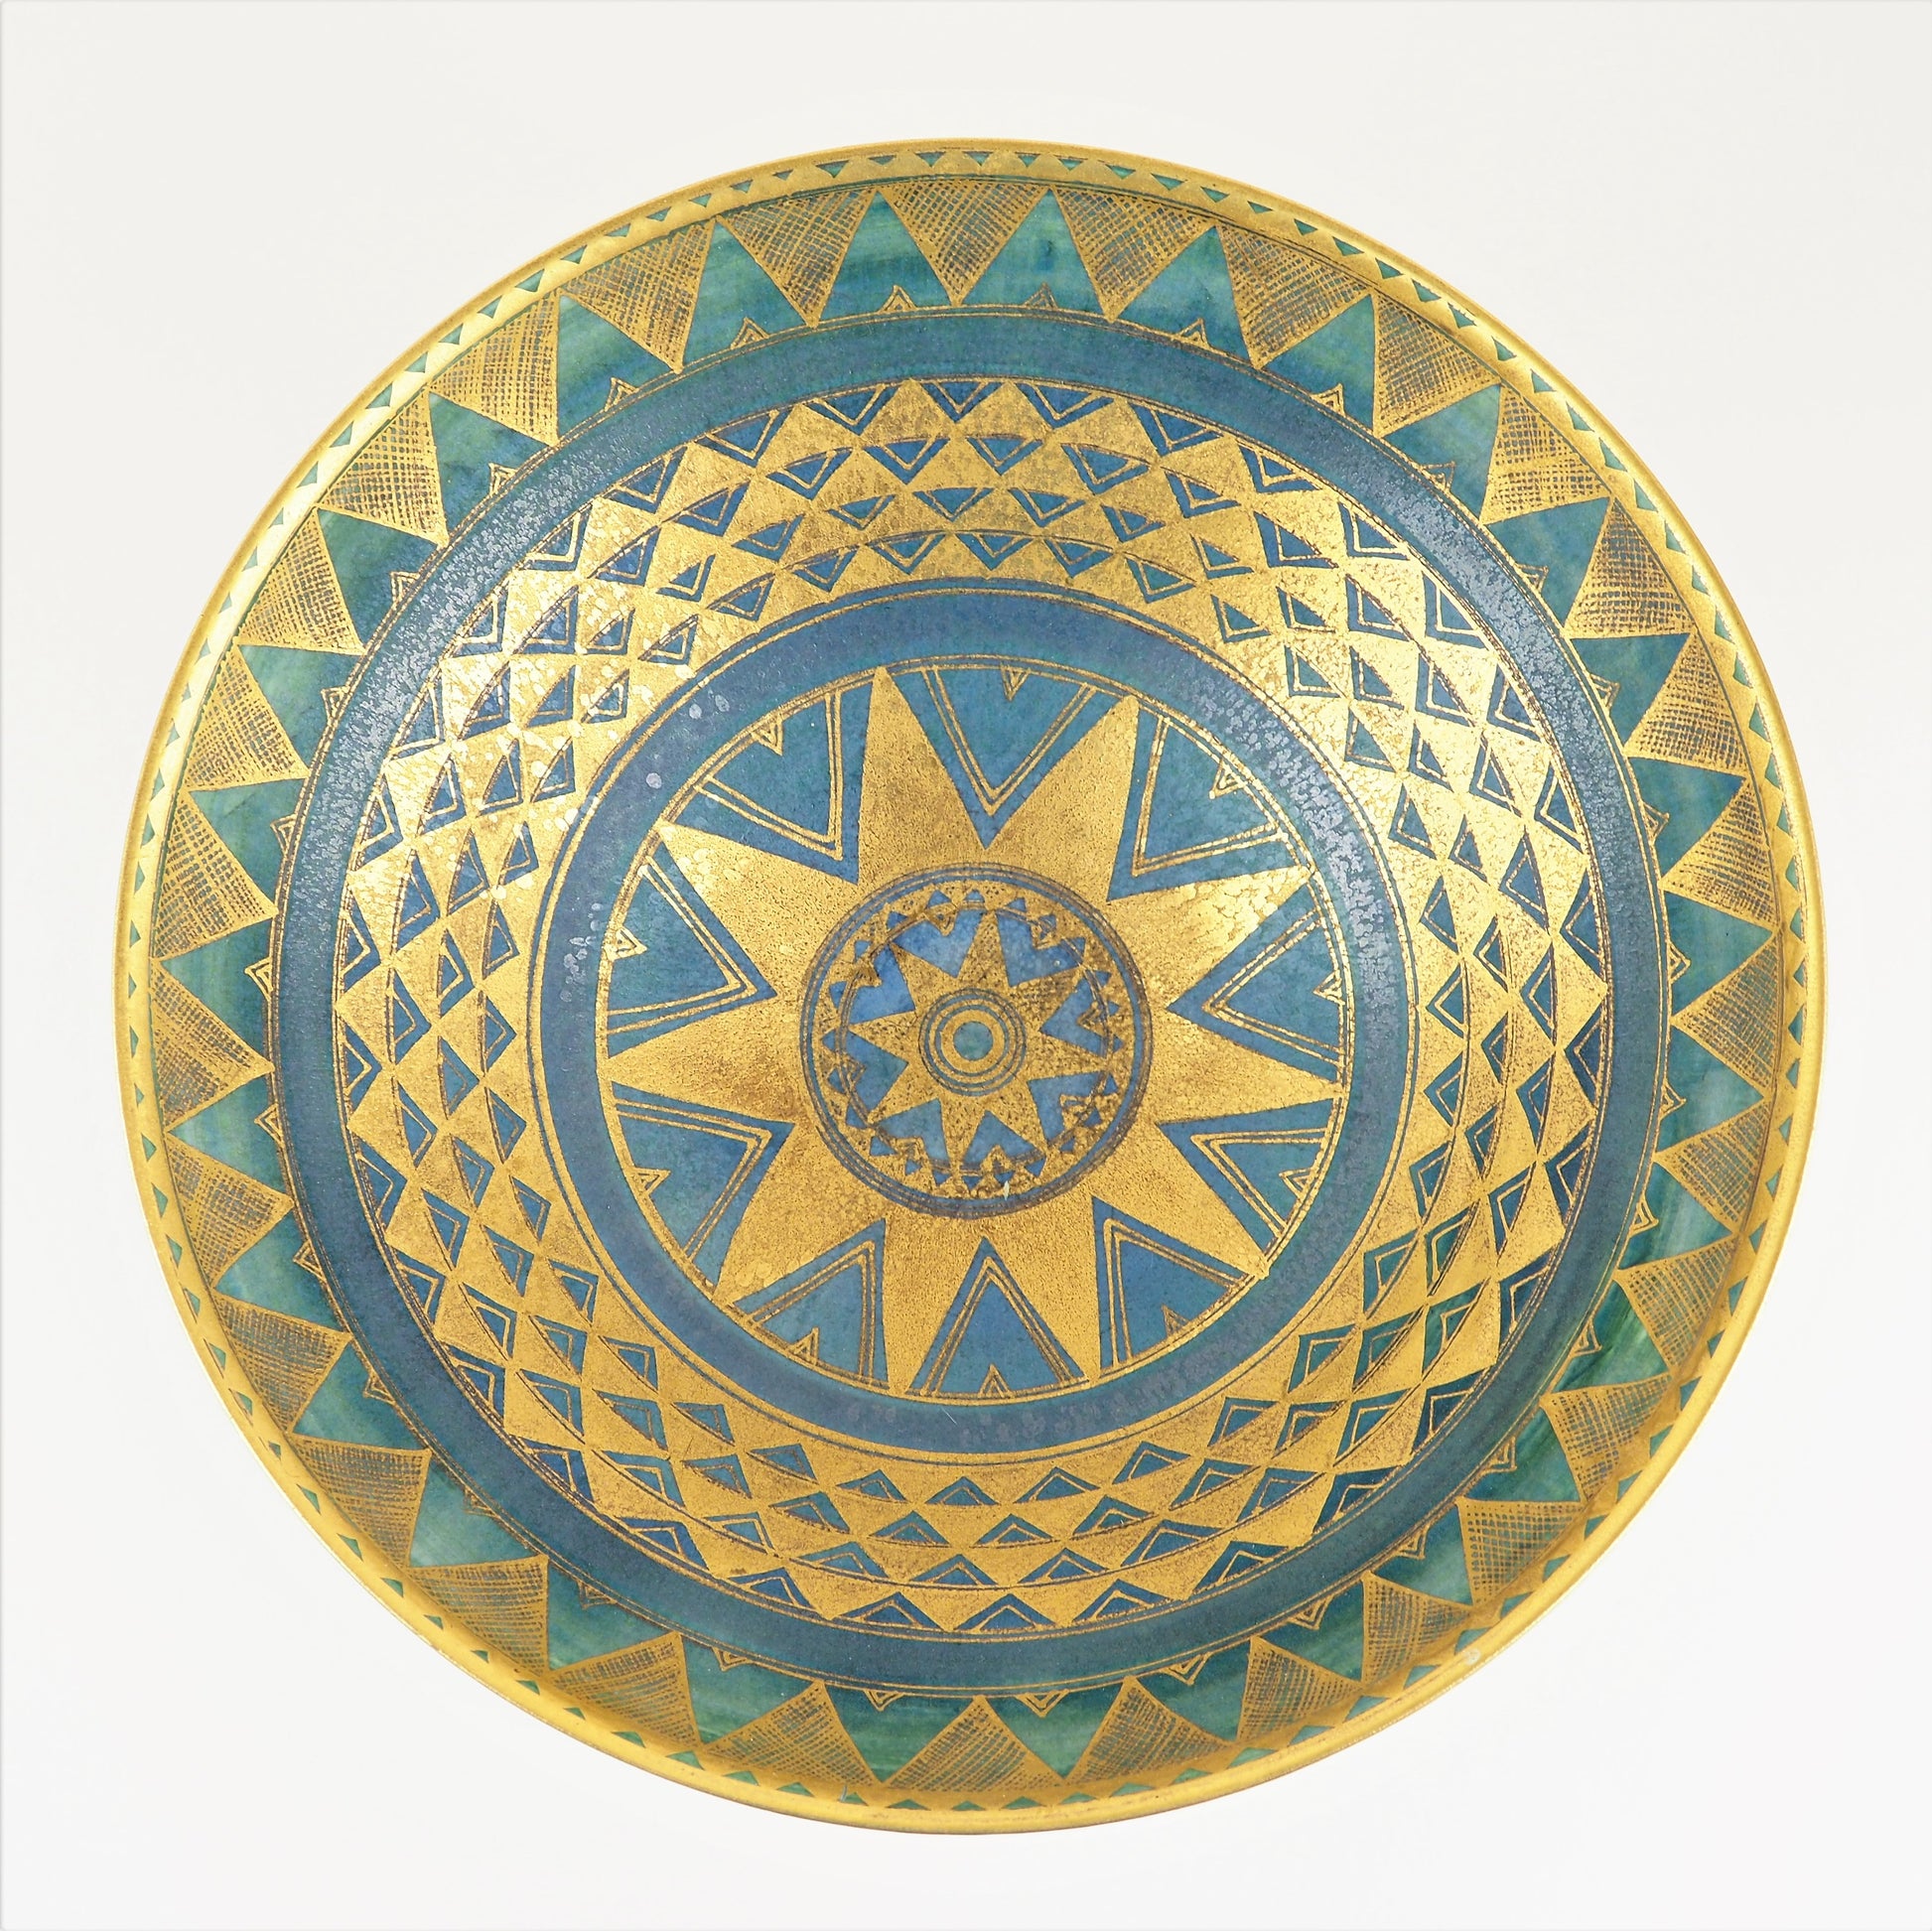 Rich, Mary - Large Porcelain Bowl | Mary Rich | Primavera Gallery